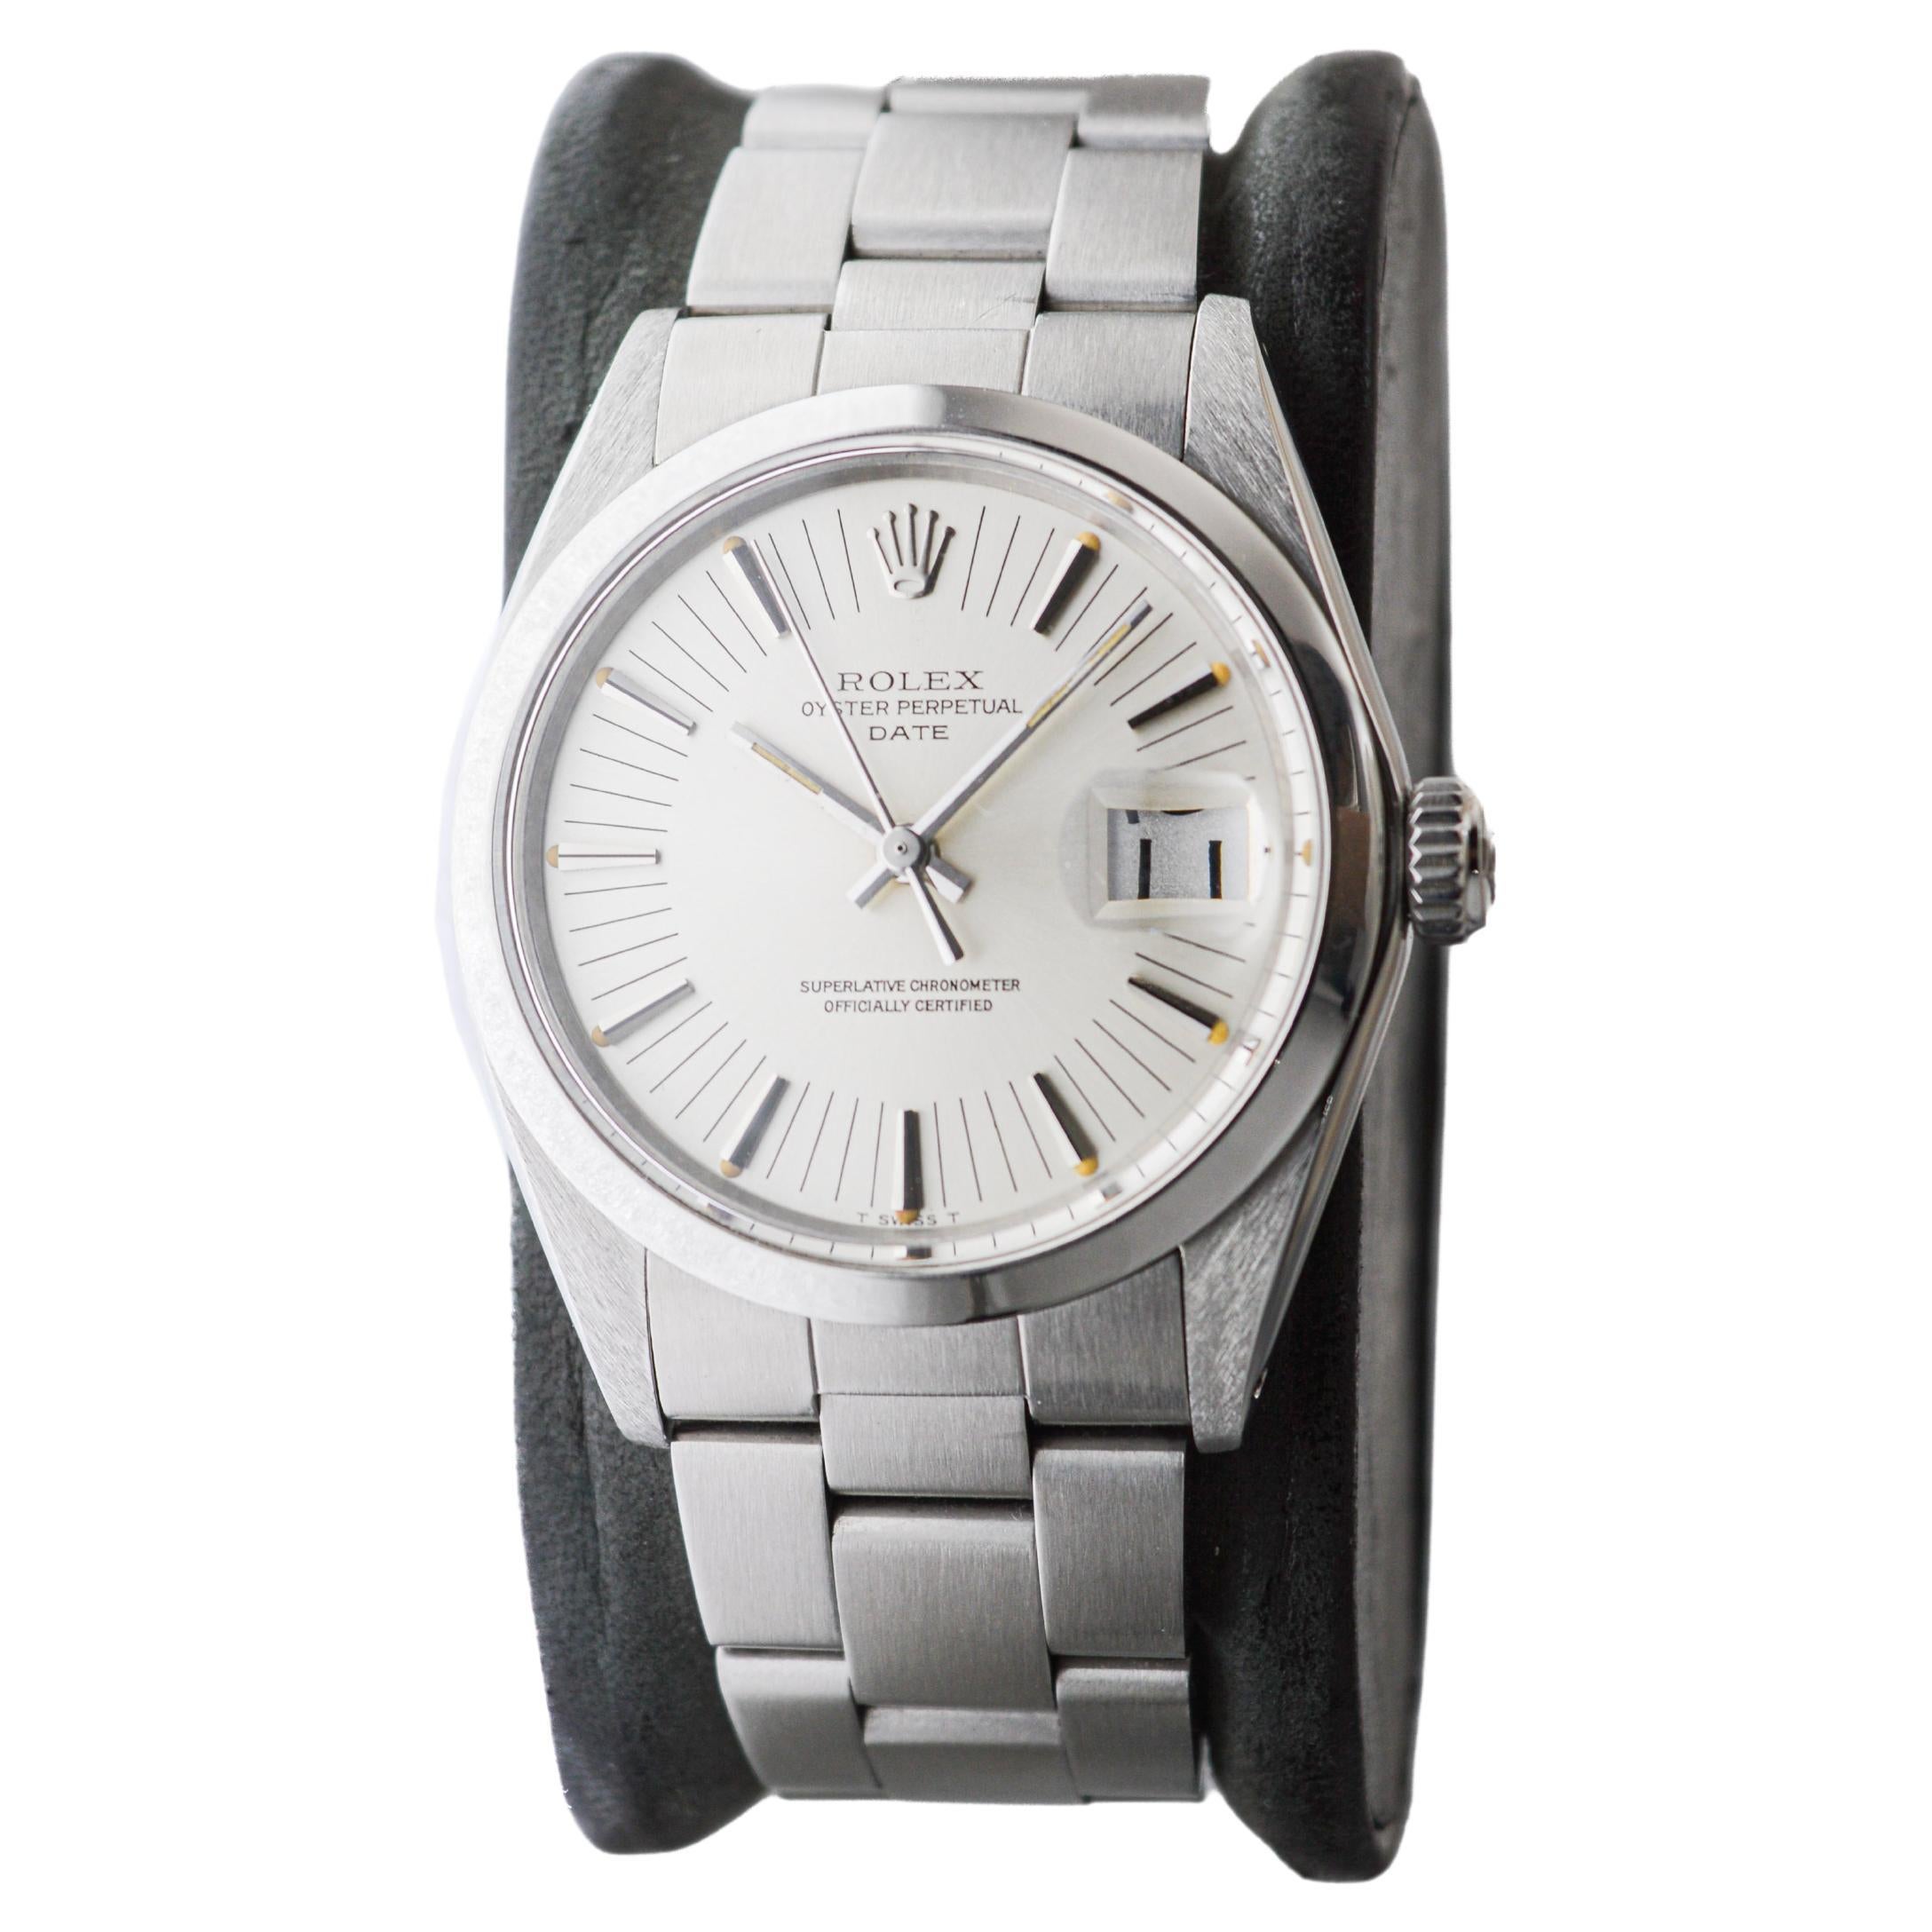 Modern Rolex Steel Oyster Perpetual Date with Original Bracelet From 1973 Rare Dial For Sale